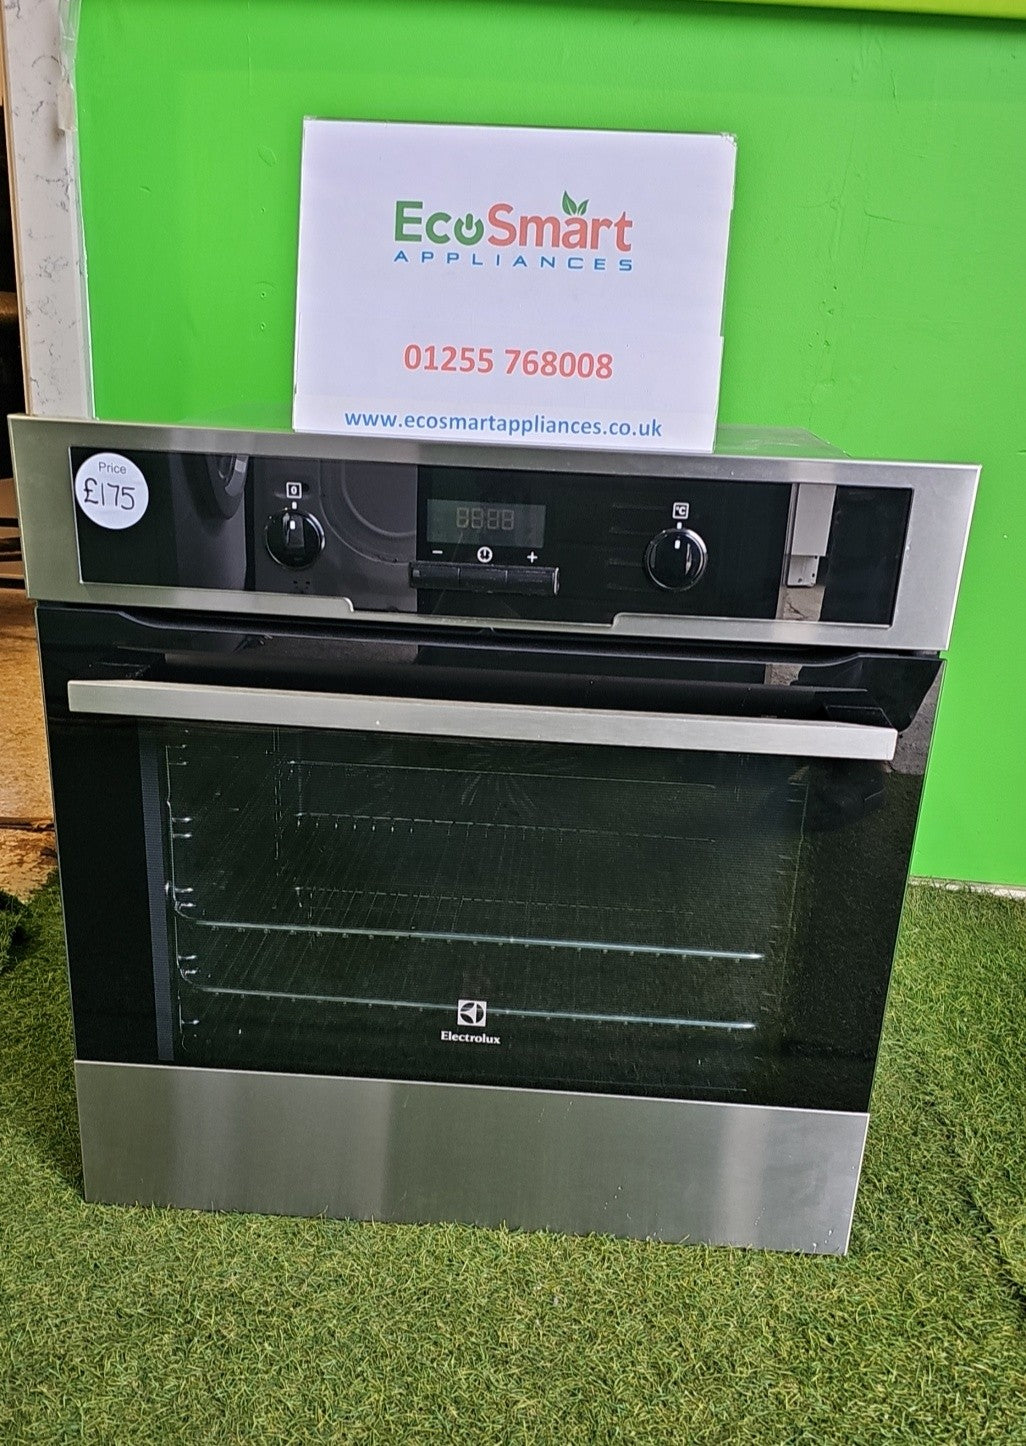 EcoSmart Appliances - Electrolux built in Electric Single over in stainless steel (1184)